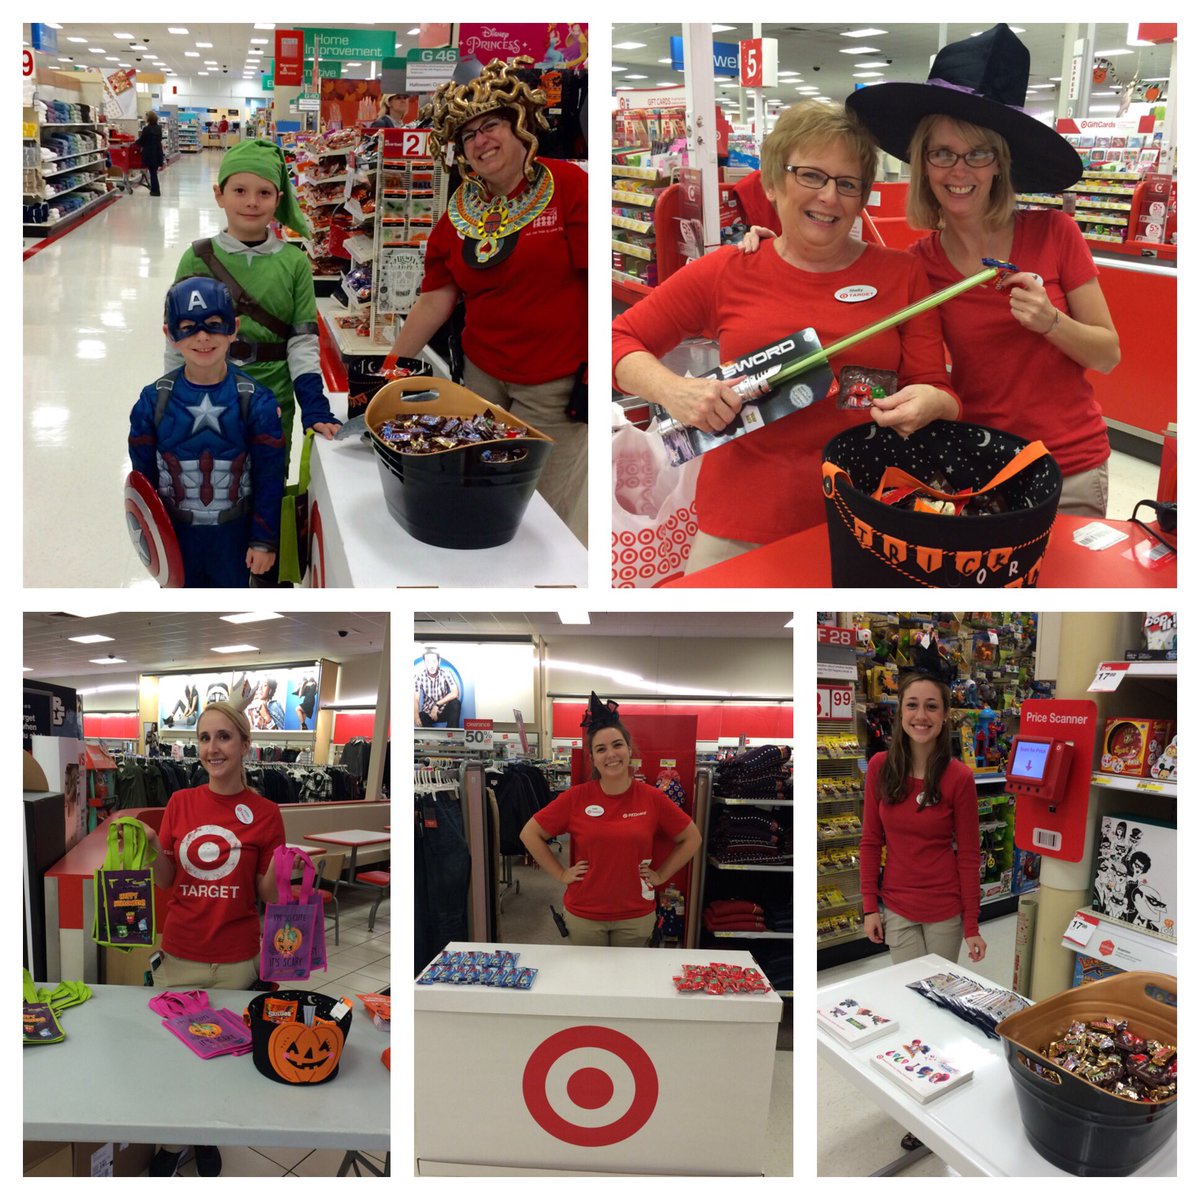 T0610 is super excited for our Spooktacular event! Kids are loving it! #thecrick #spooktacularevent #wearetarget @meganecarson